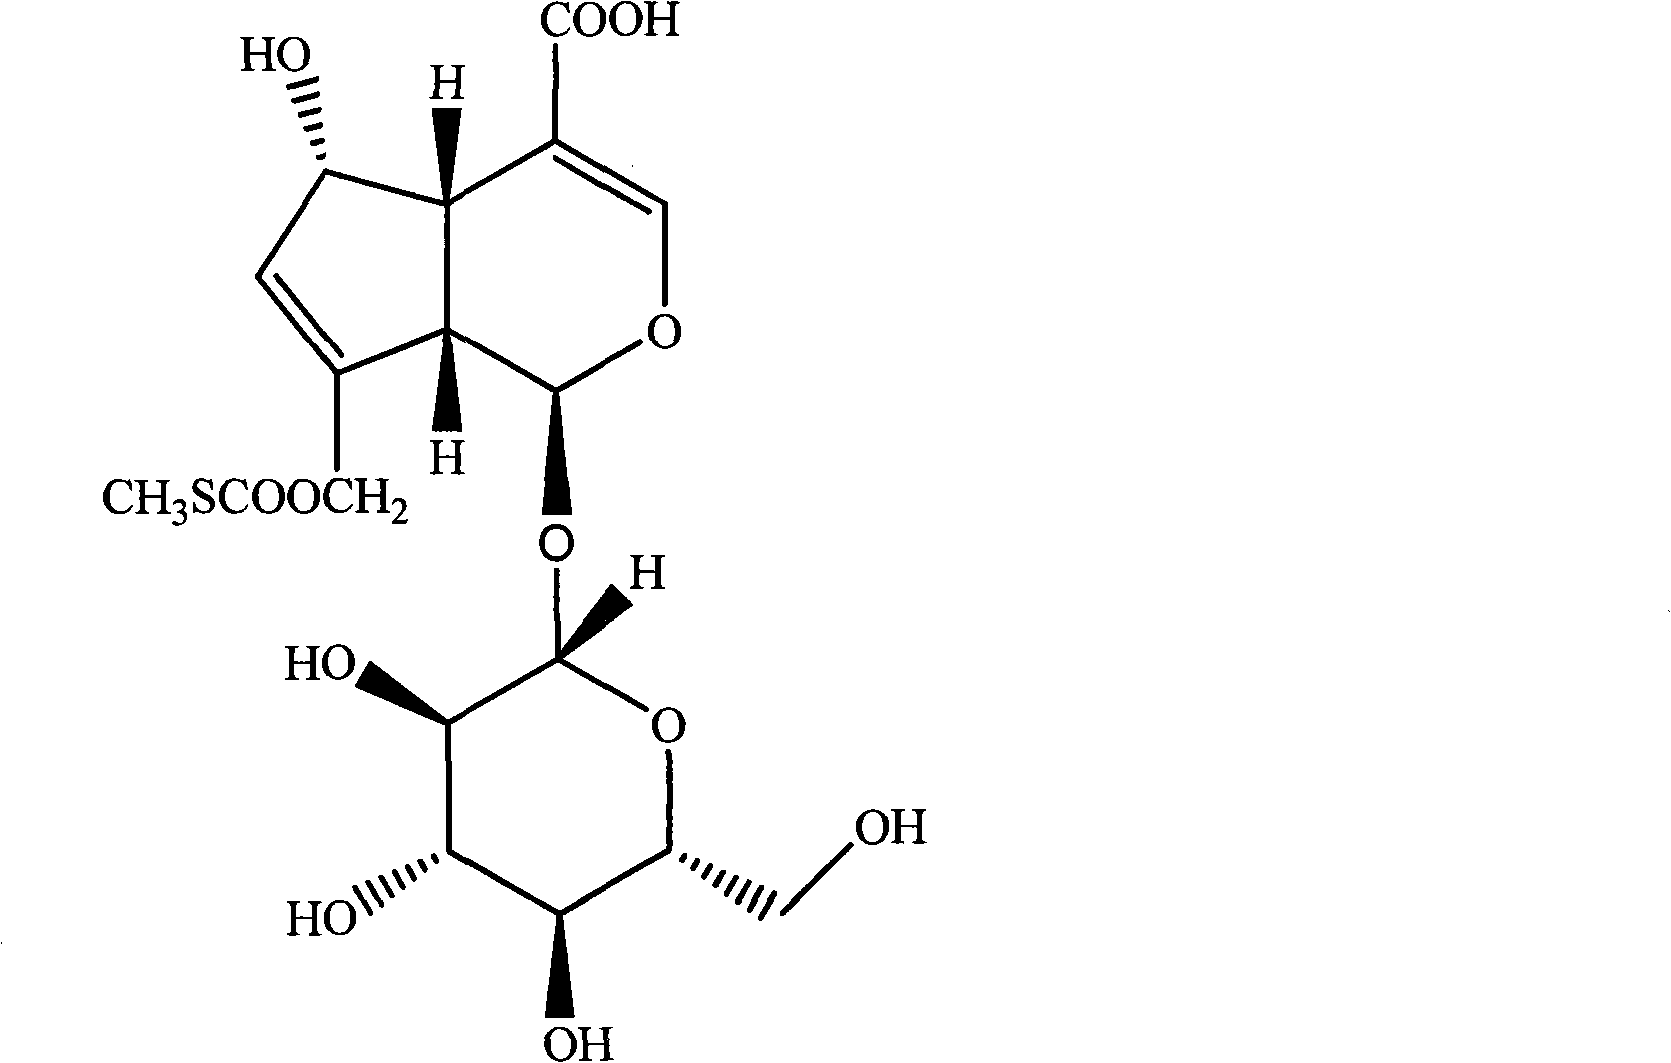 Application of paederoside acid or plant extract containing same